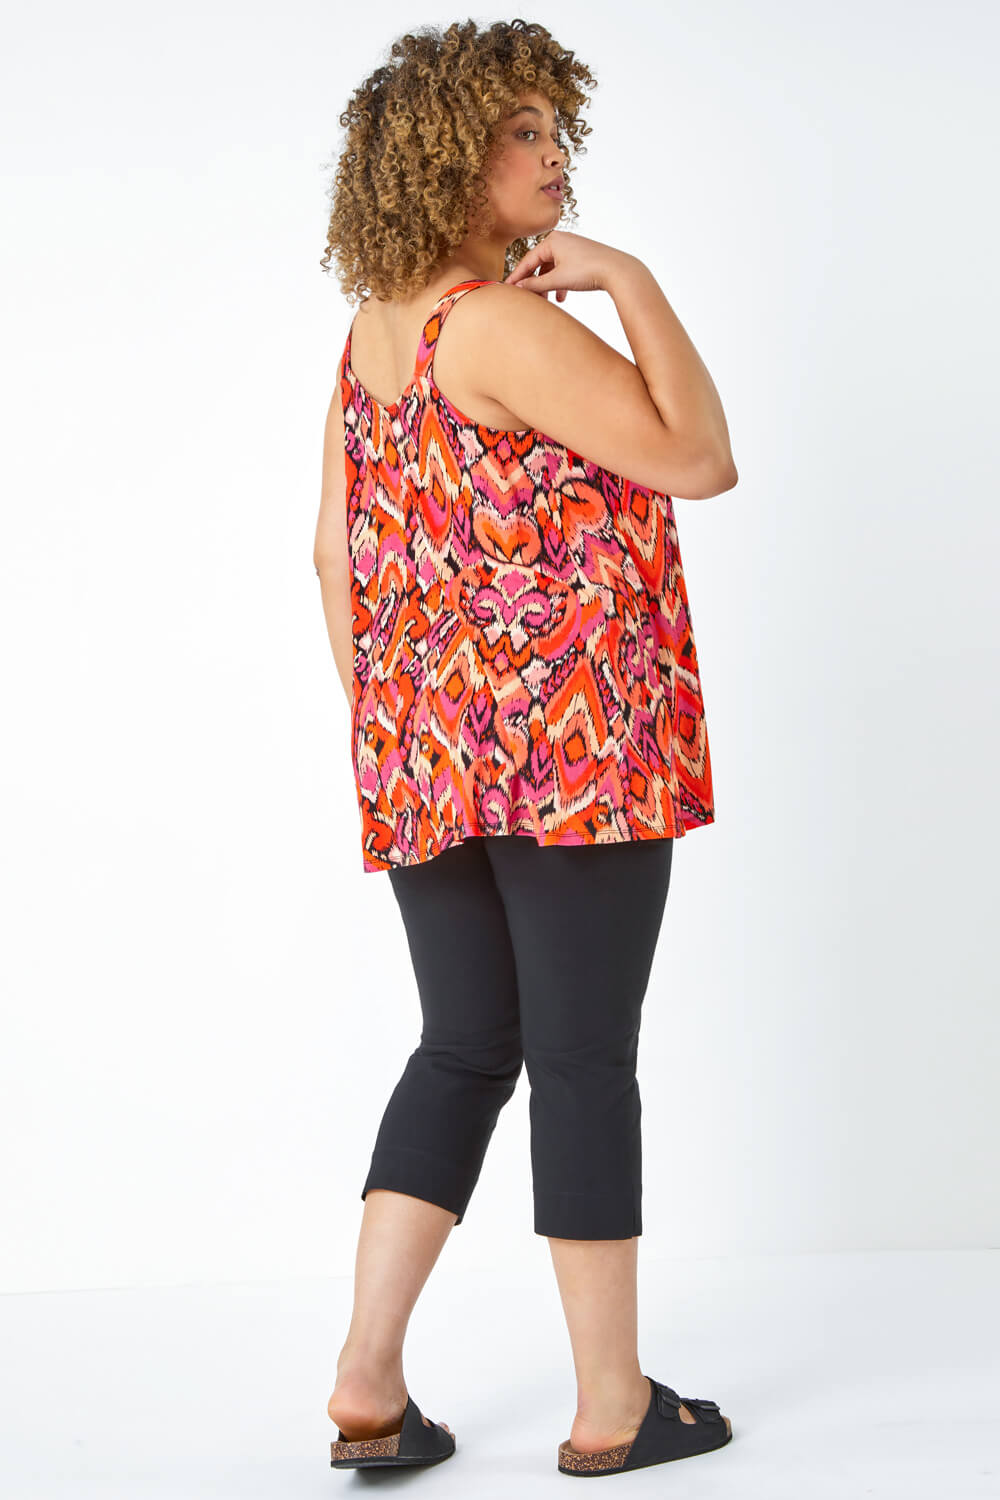 ORANGE Curve Aztec Print Ruched Stretch Top, Image 3 of 5